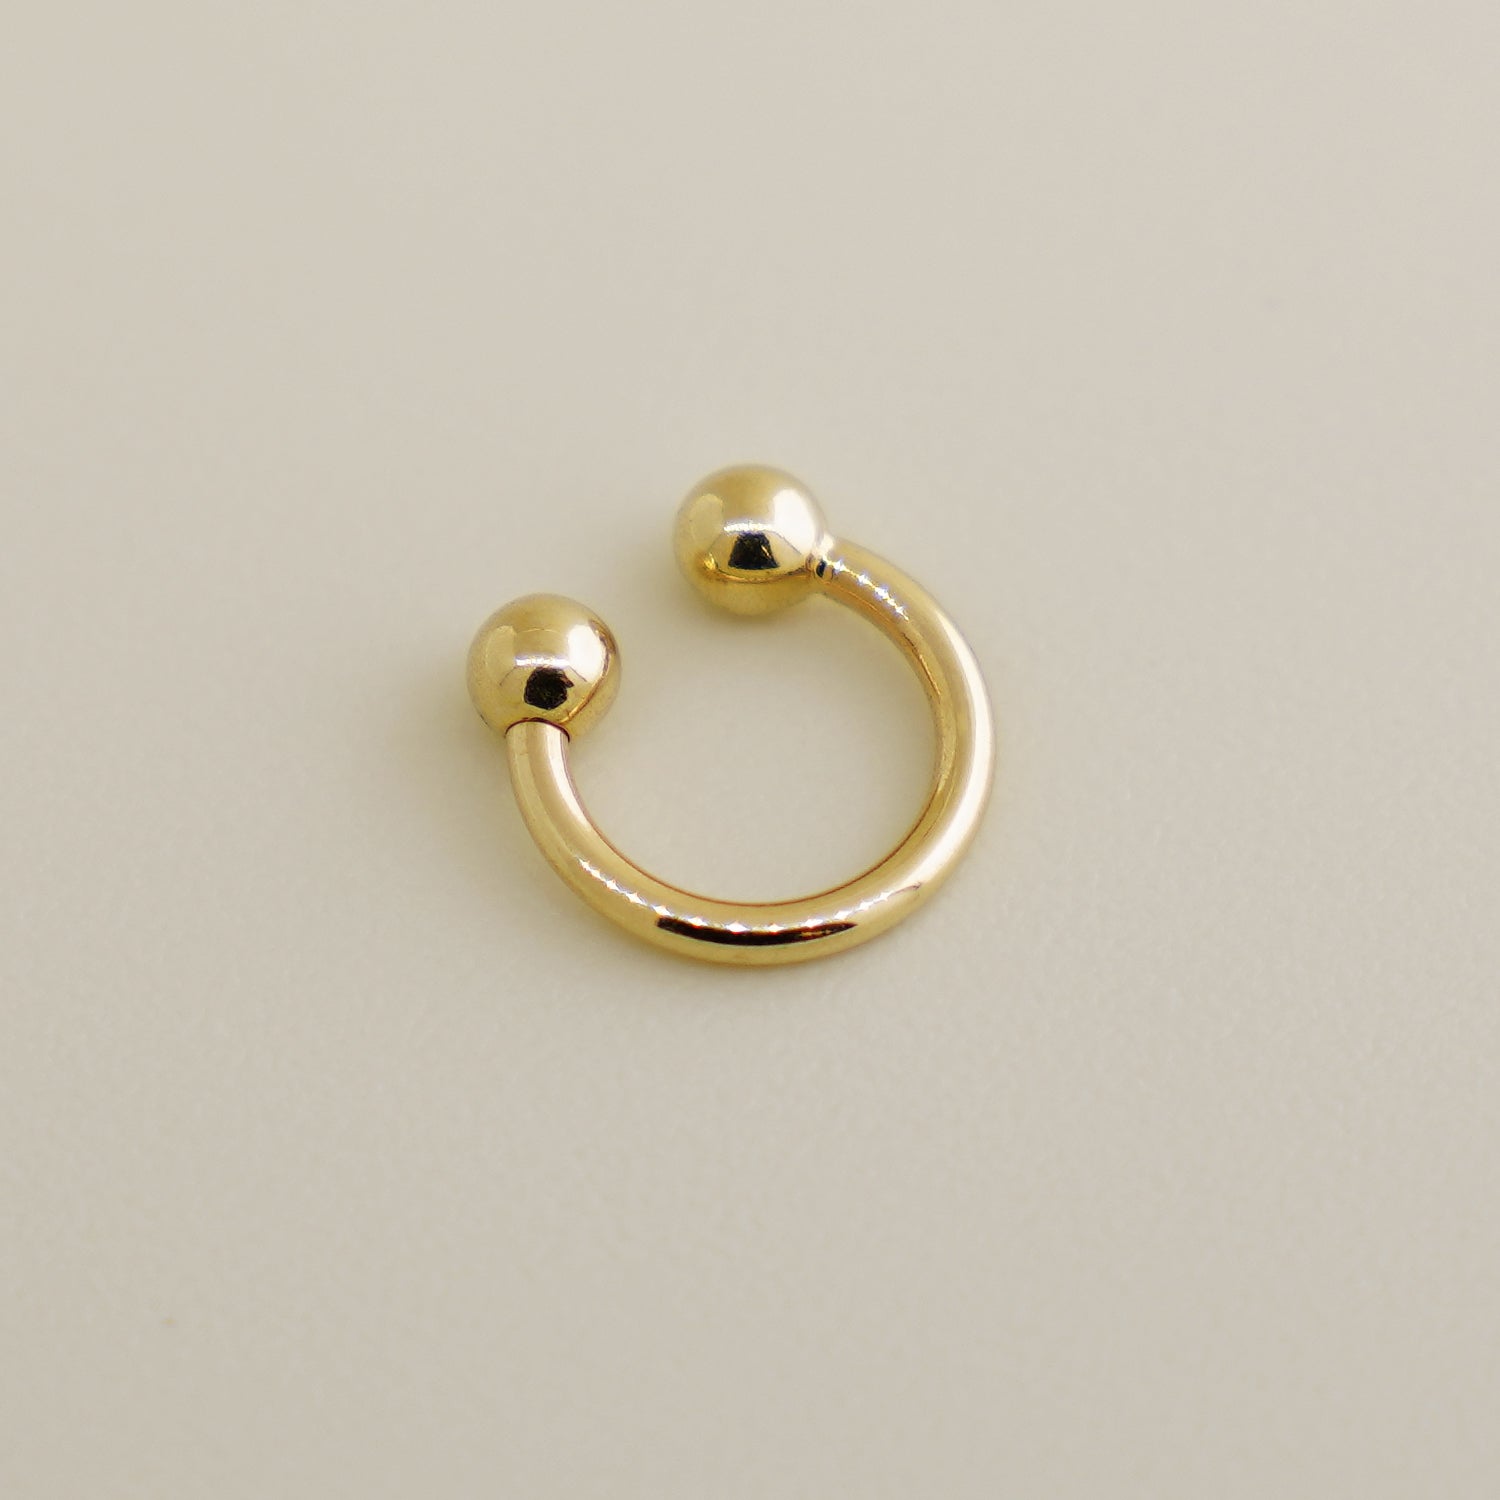 14K Solid Gold 3mm Ball Ear & Nose Piercing - anygolds